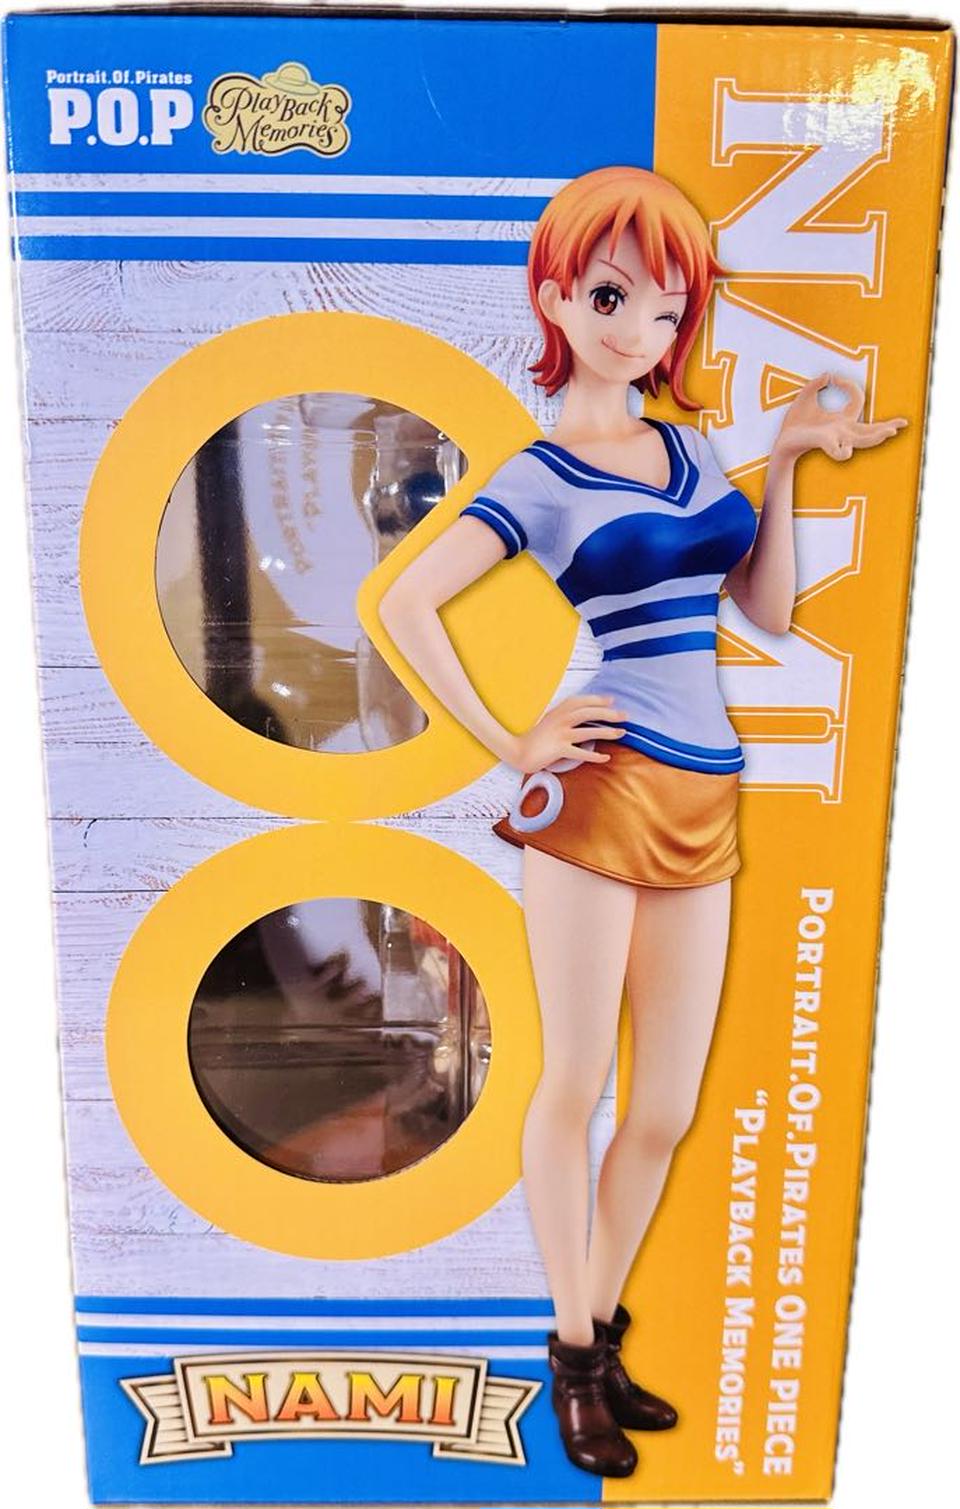 Portrait Of Pirates Playback Memories One Piece Nami Figure for Sale